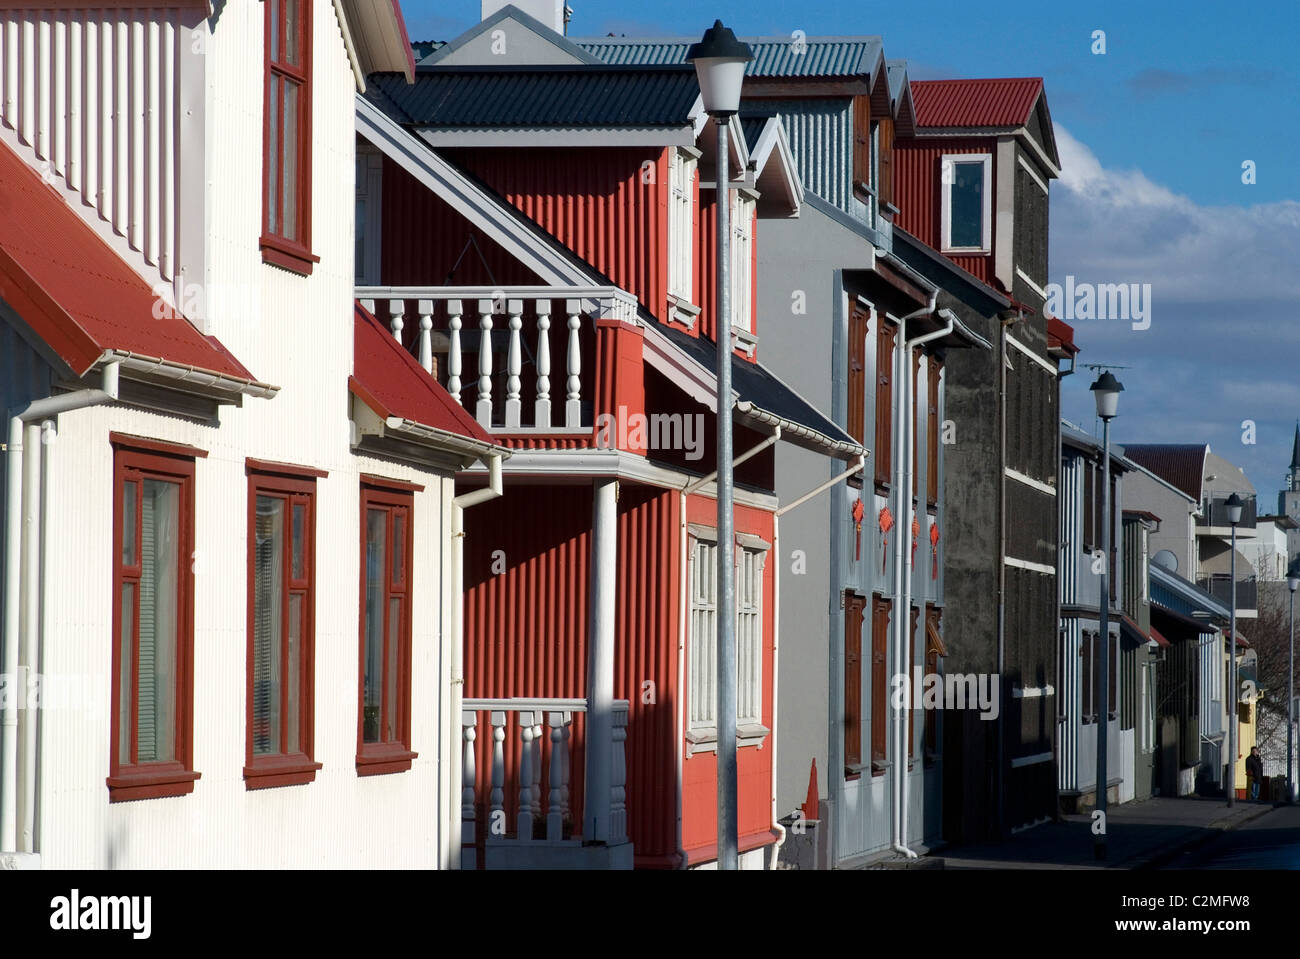 Colorful housing estate in corrugated iron, 101, central Reykjavik, Iceland Stock Photo